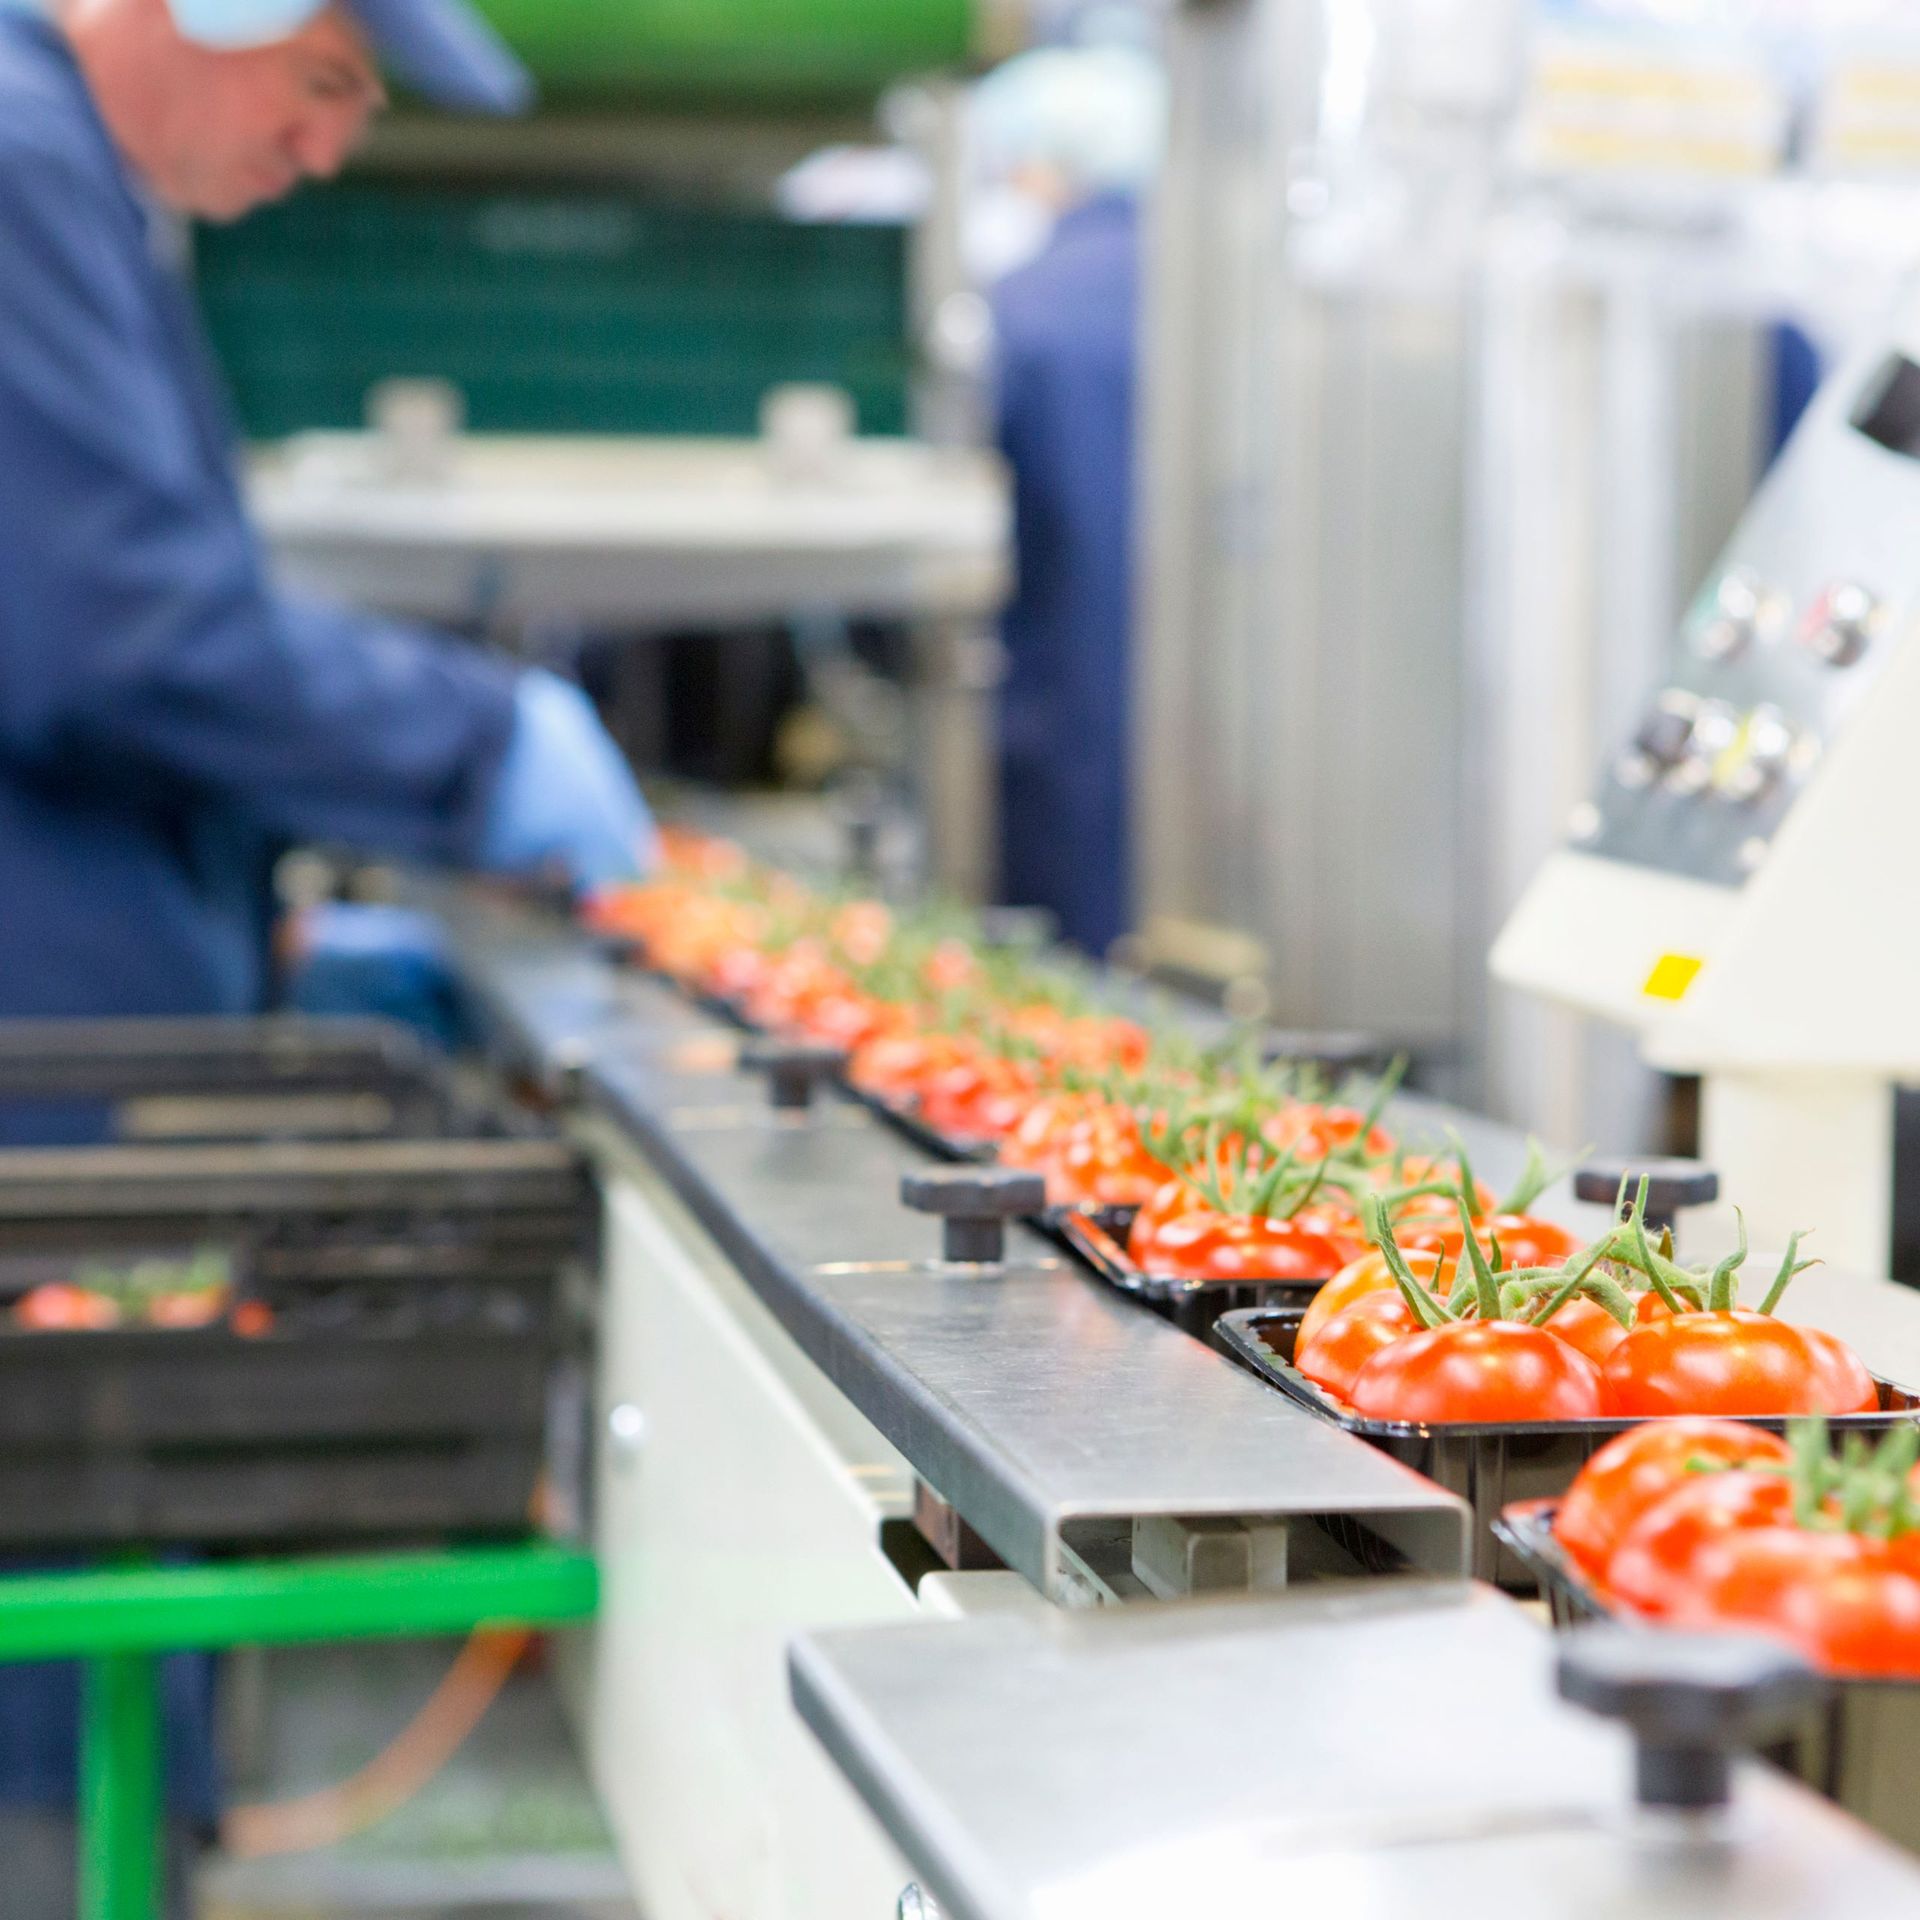 Image of a worker packing tomatoes on a production line in a food processing facility